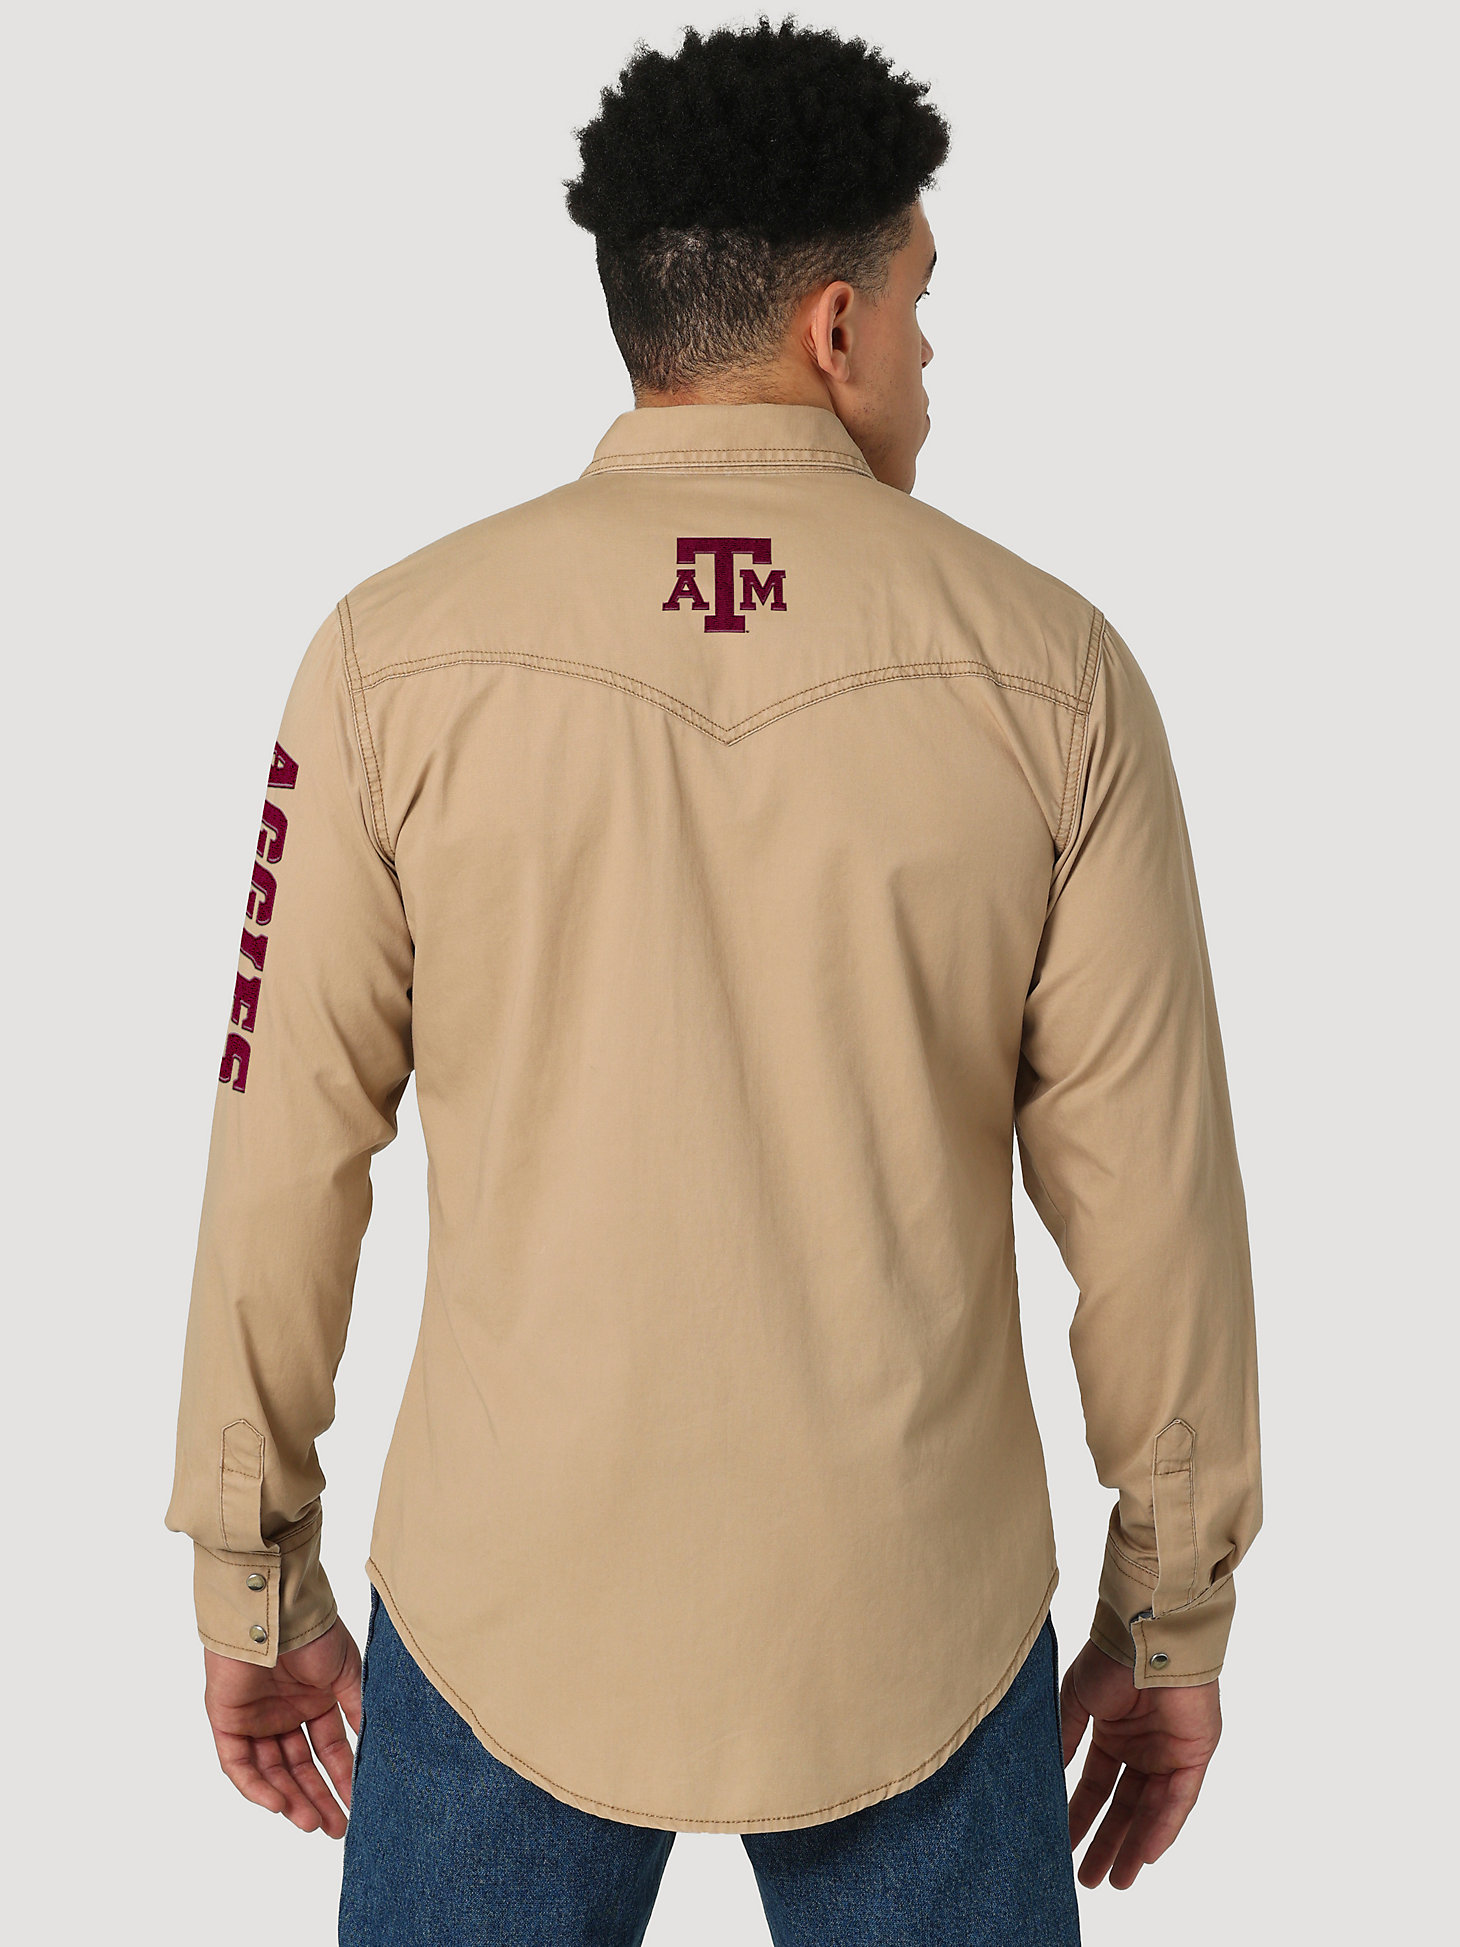 Wrangler Collegiate Embroidered Twill Western Snap Shirt in Texas A&M alternative view 3